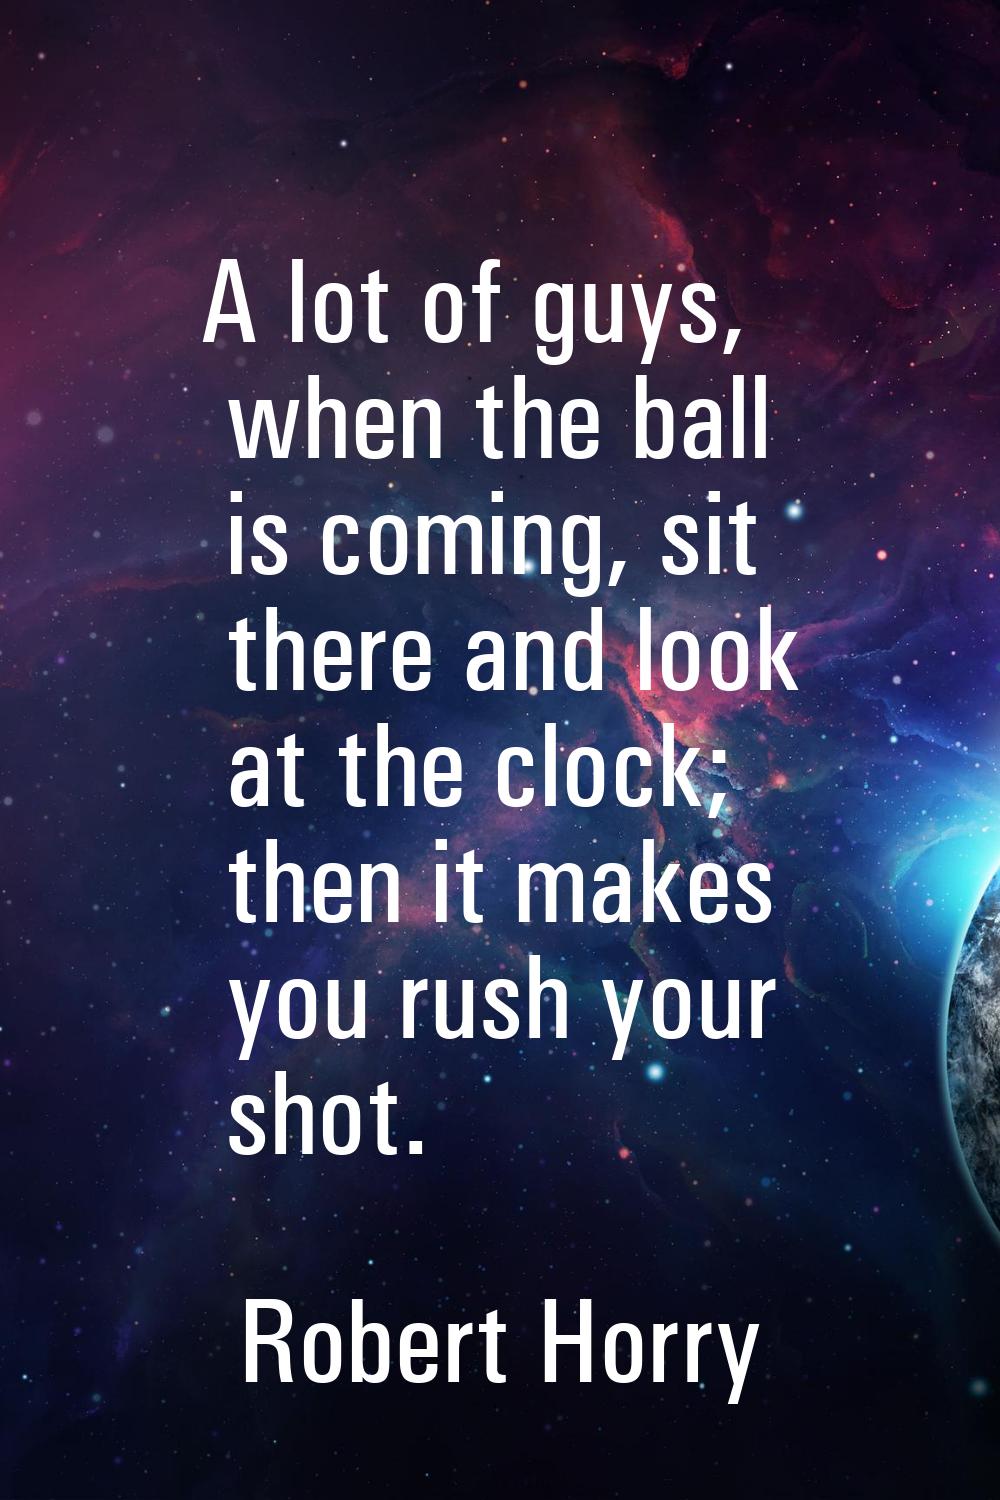 A lot of guys, when the ball is coming, sit there and look at the clock; then it makes you rush you